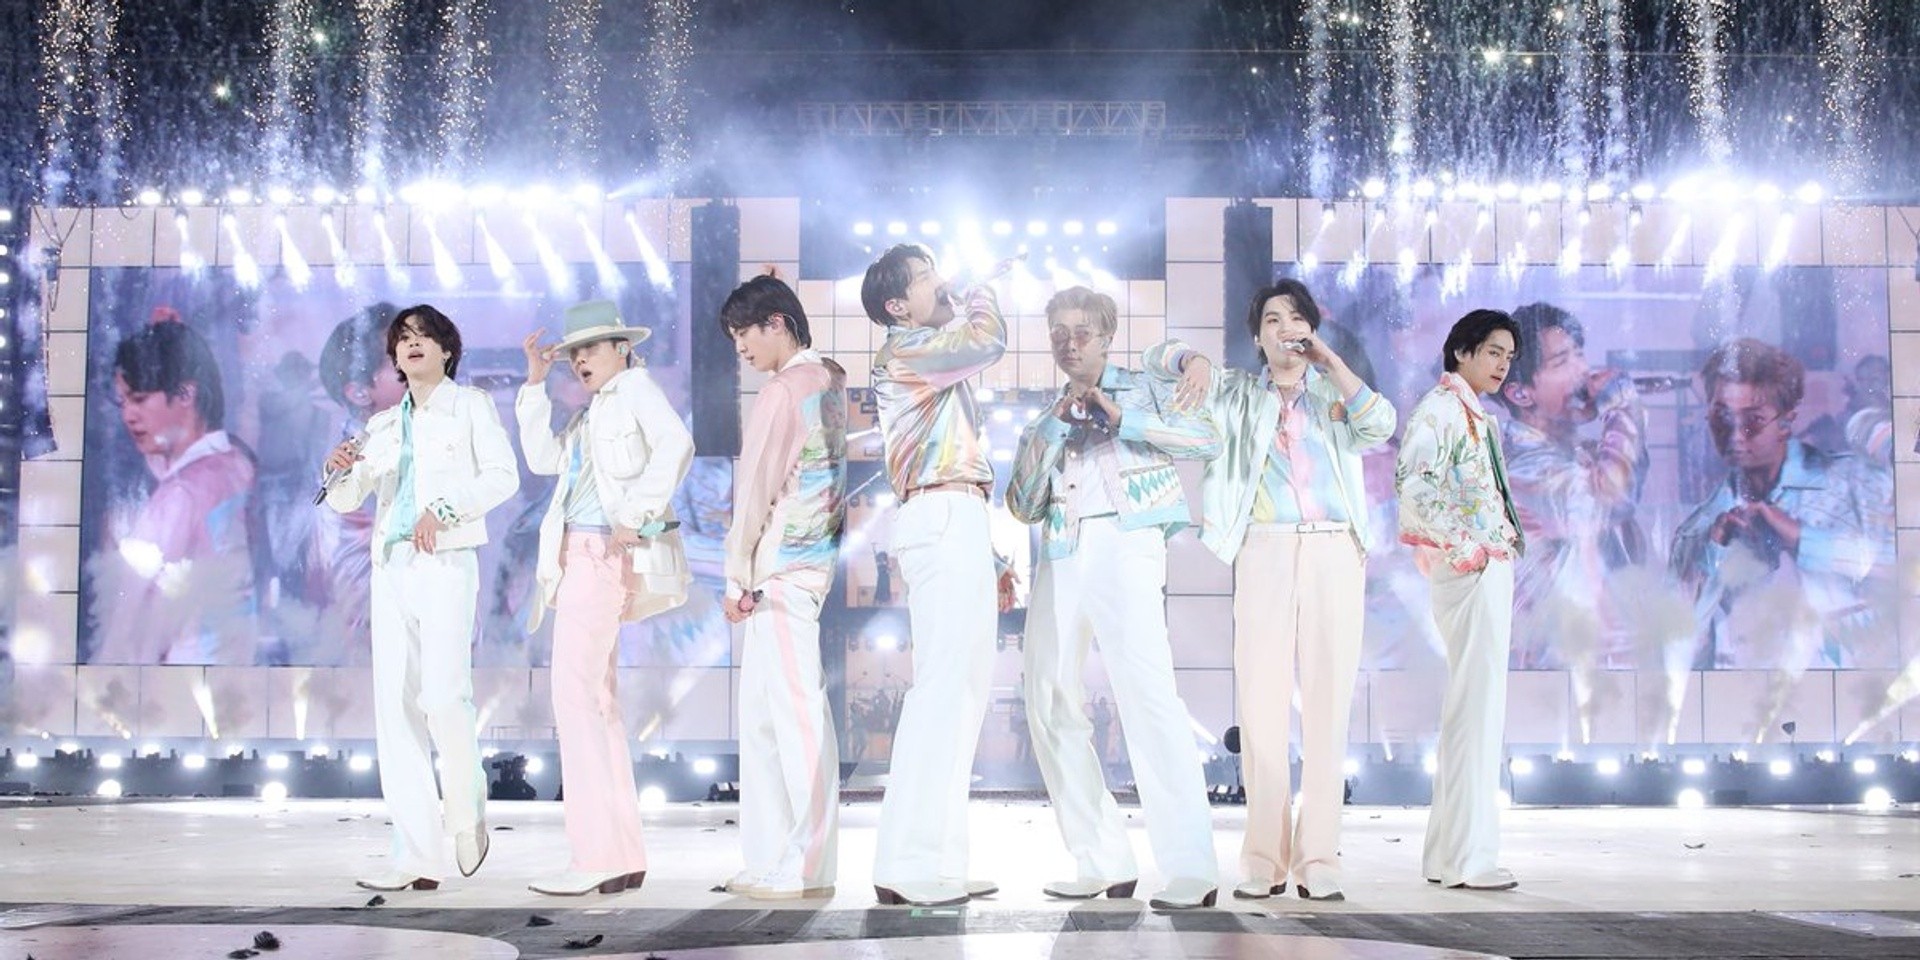 BTS come home to ARMY in first in-person concert in Seoul since 2019